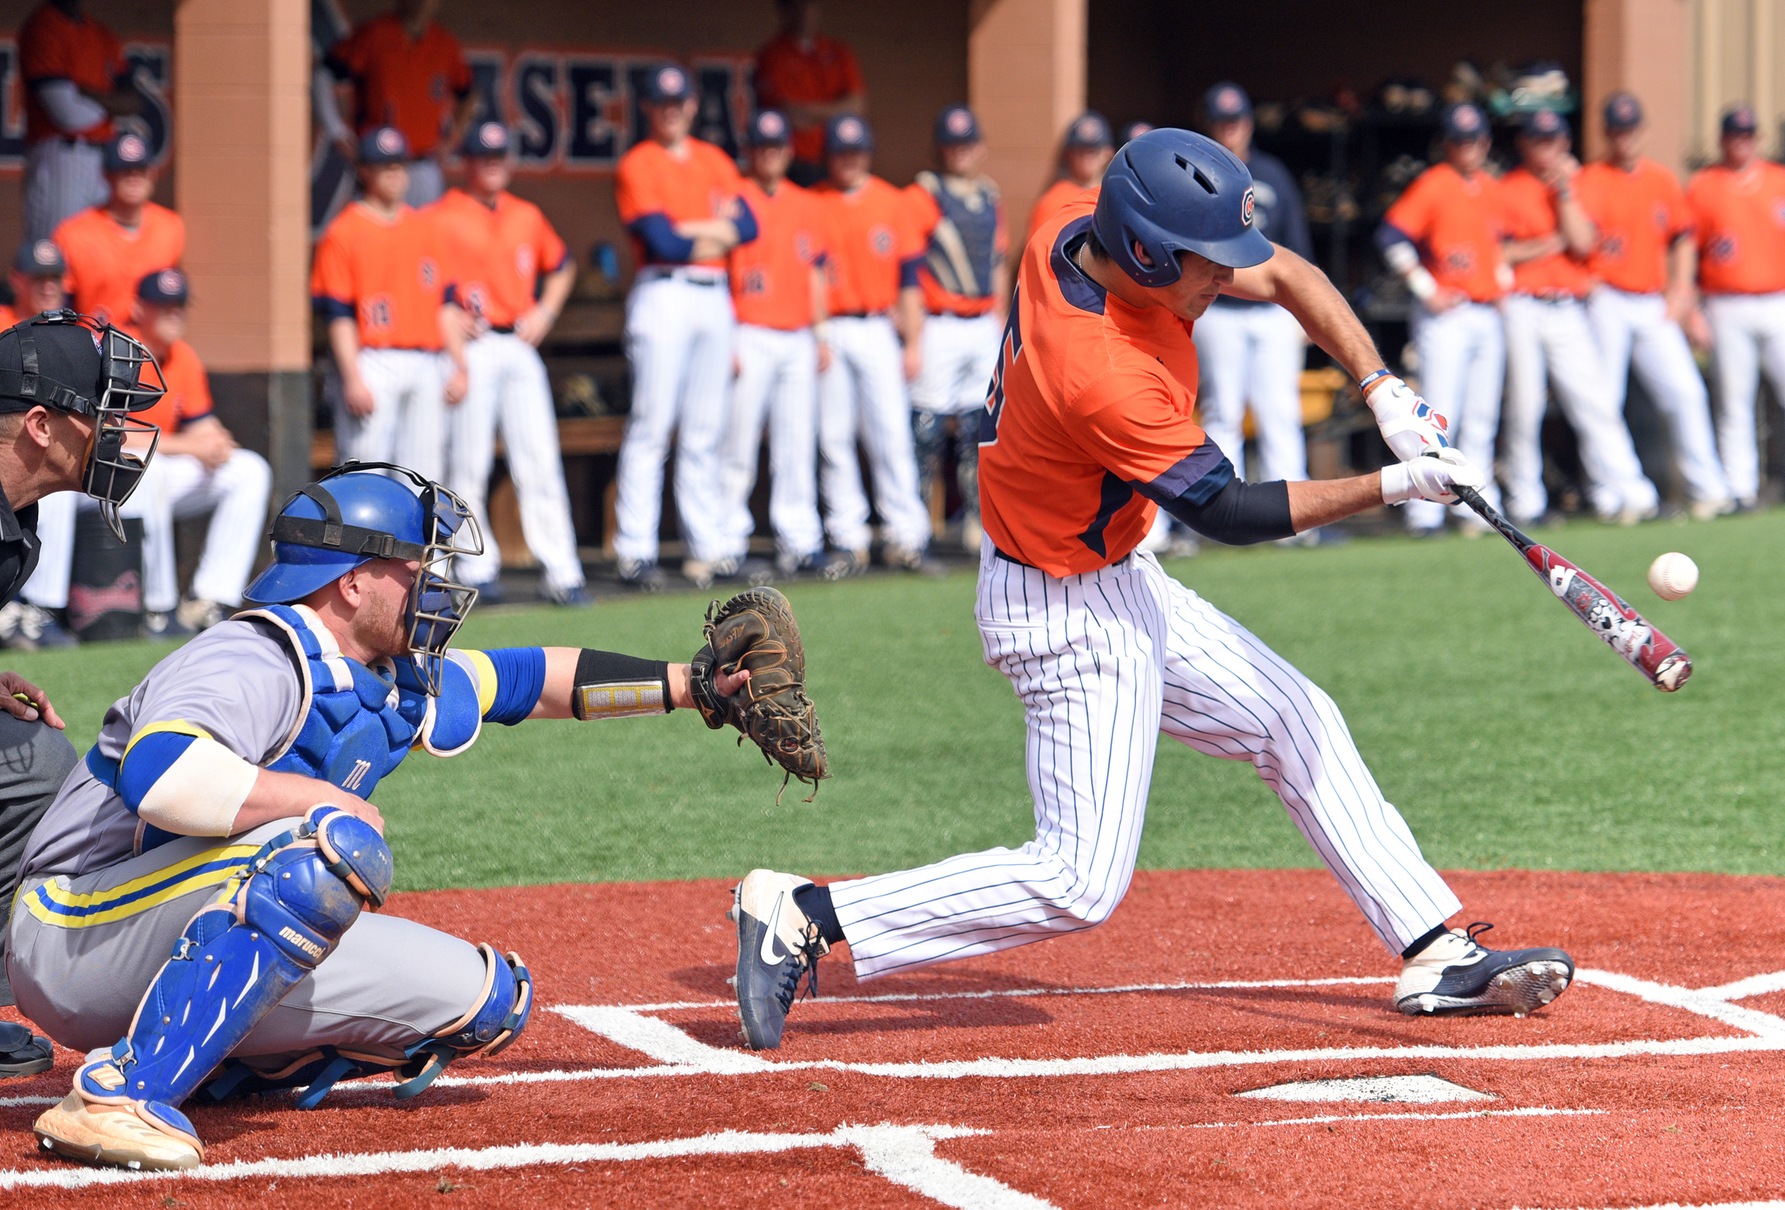 Boze’s four-hit day overshadowed in 9-7 loss at UAH